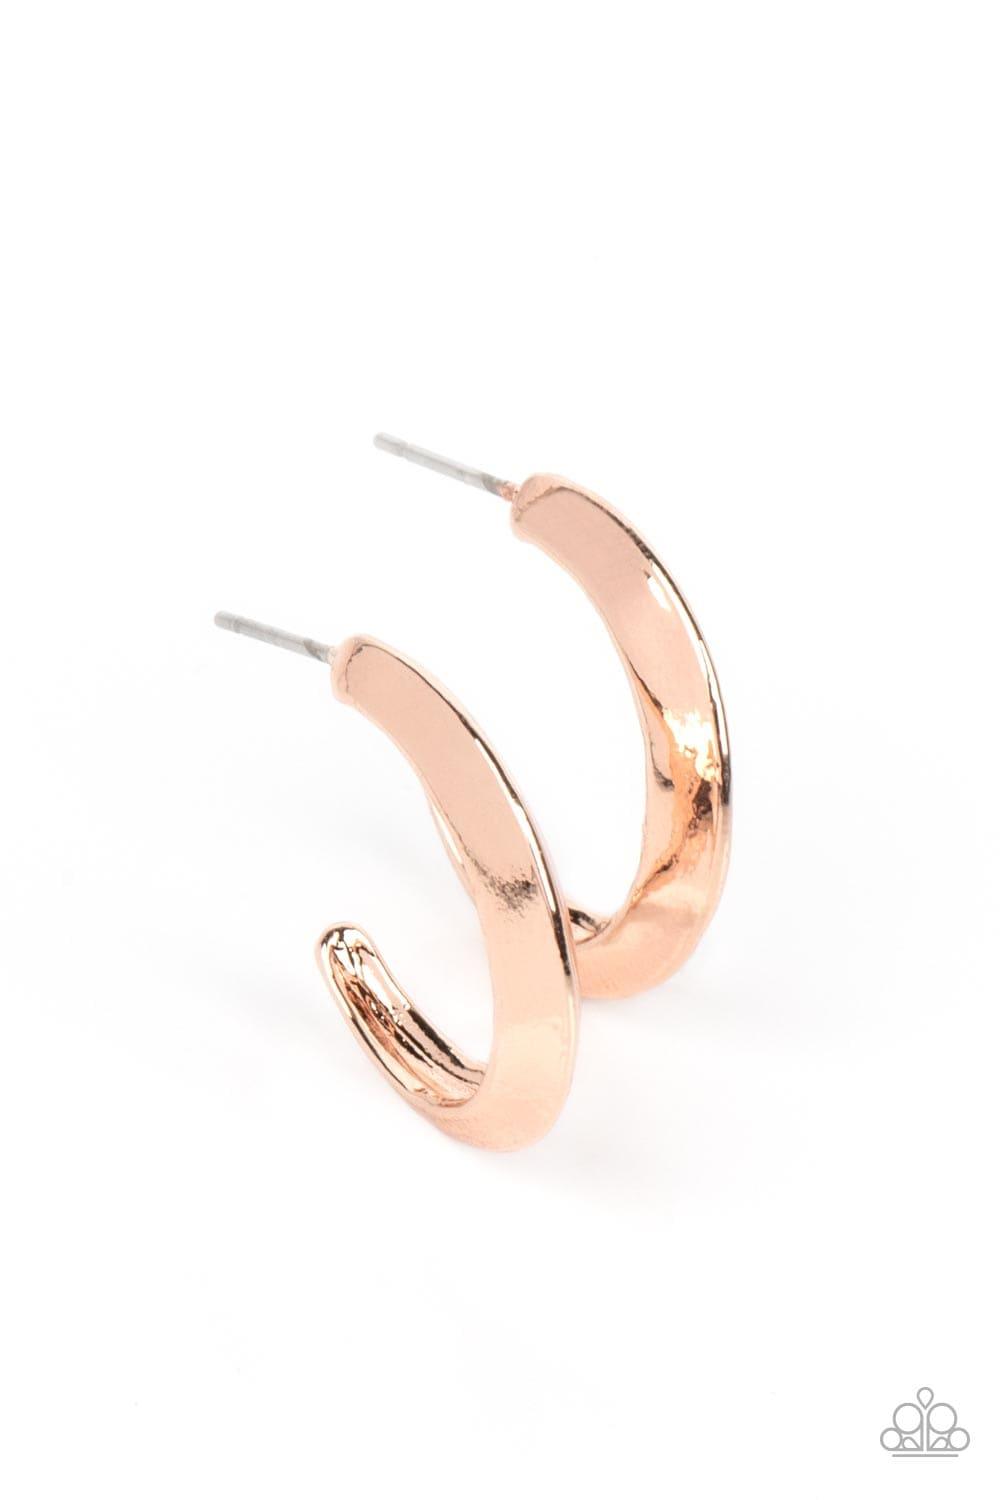 Paparazzi Accessories - Bevel Up - Rose Gold Small Hoops - Bling by JessieK